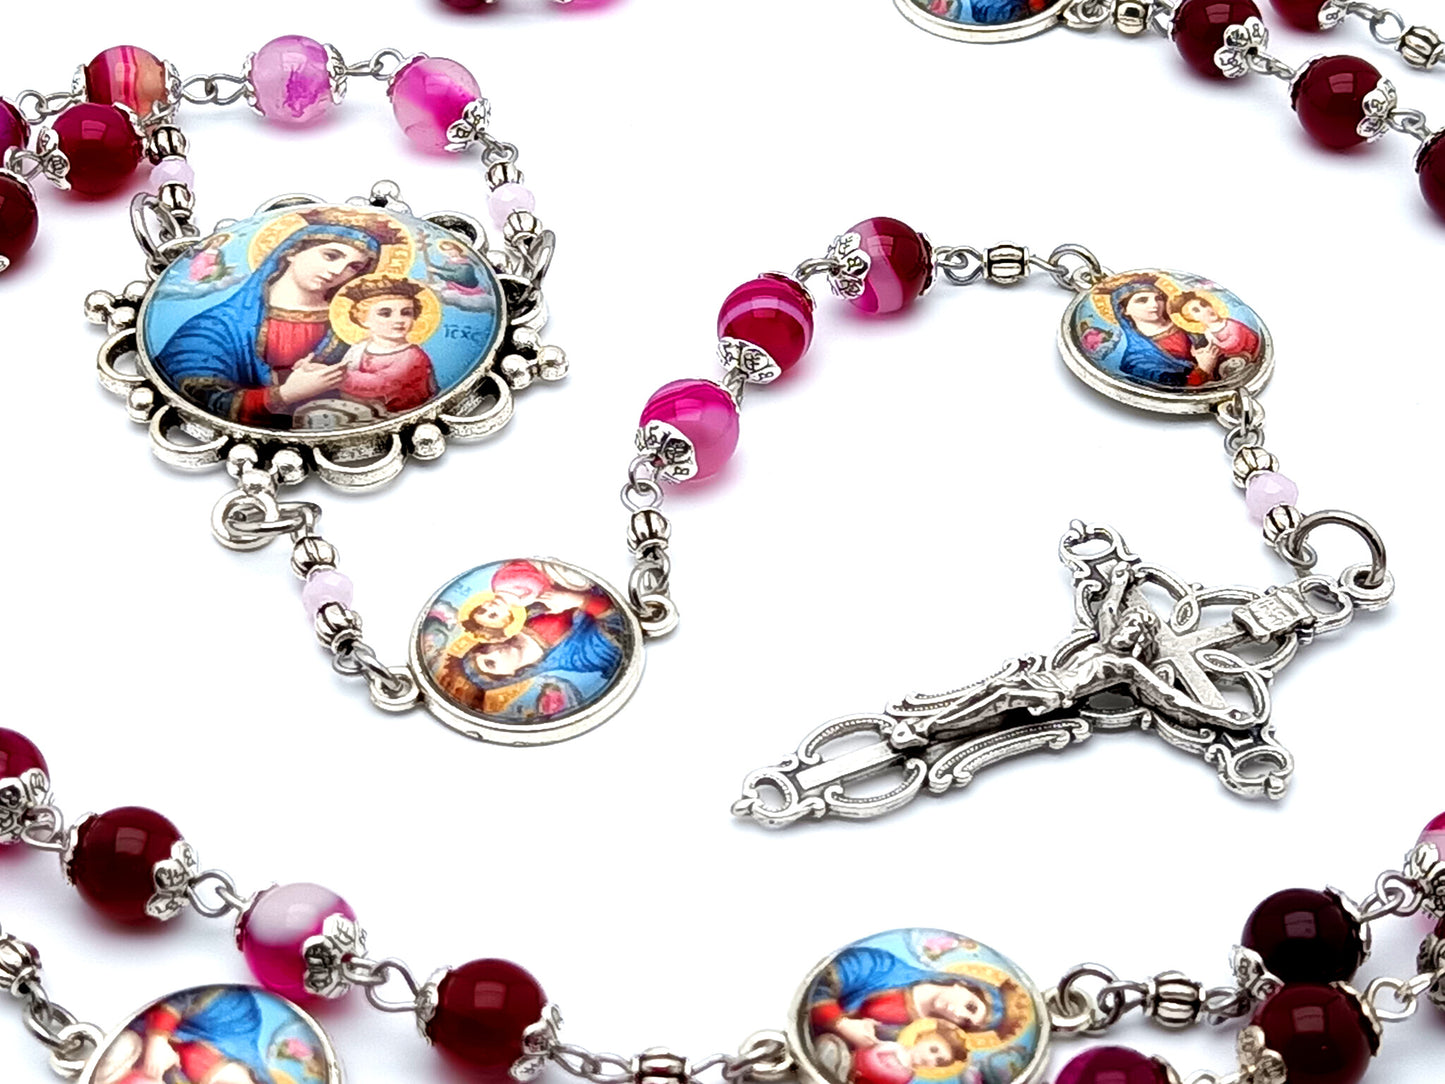 Our Lady of Perpetual Help unique rosary beads with agate gemstone beads and Our Lady of Perpetual Succor linking medals and filigree crucifix.